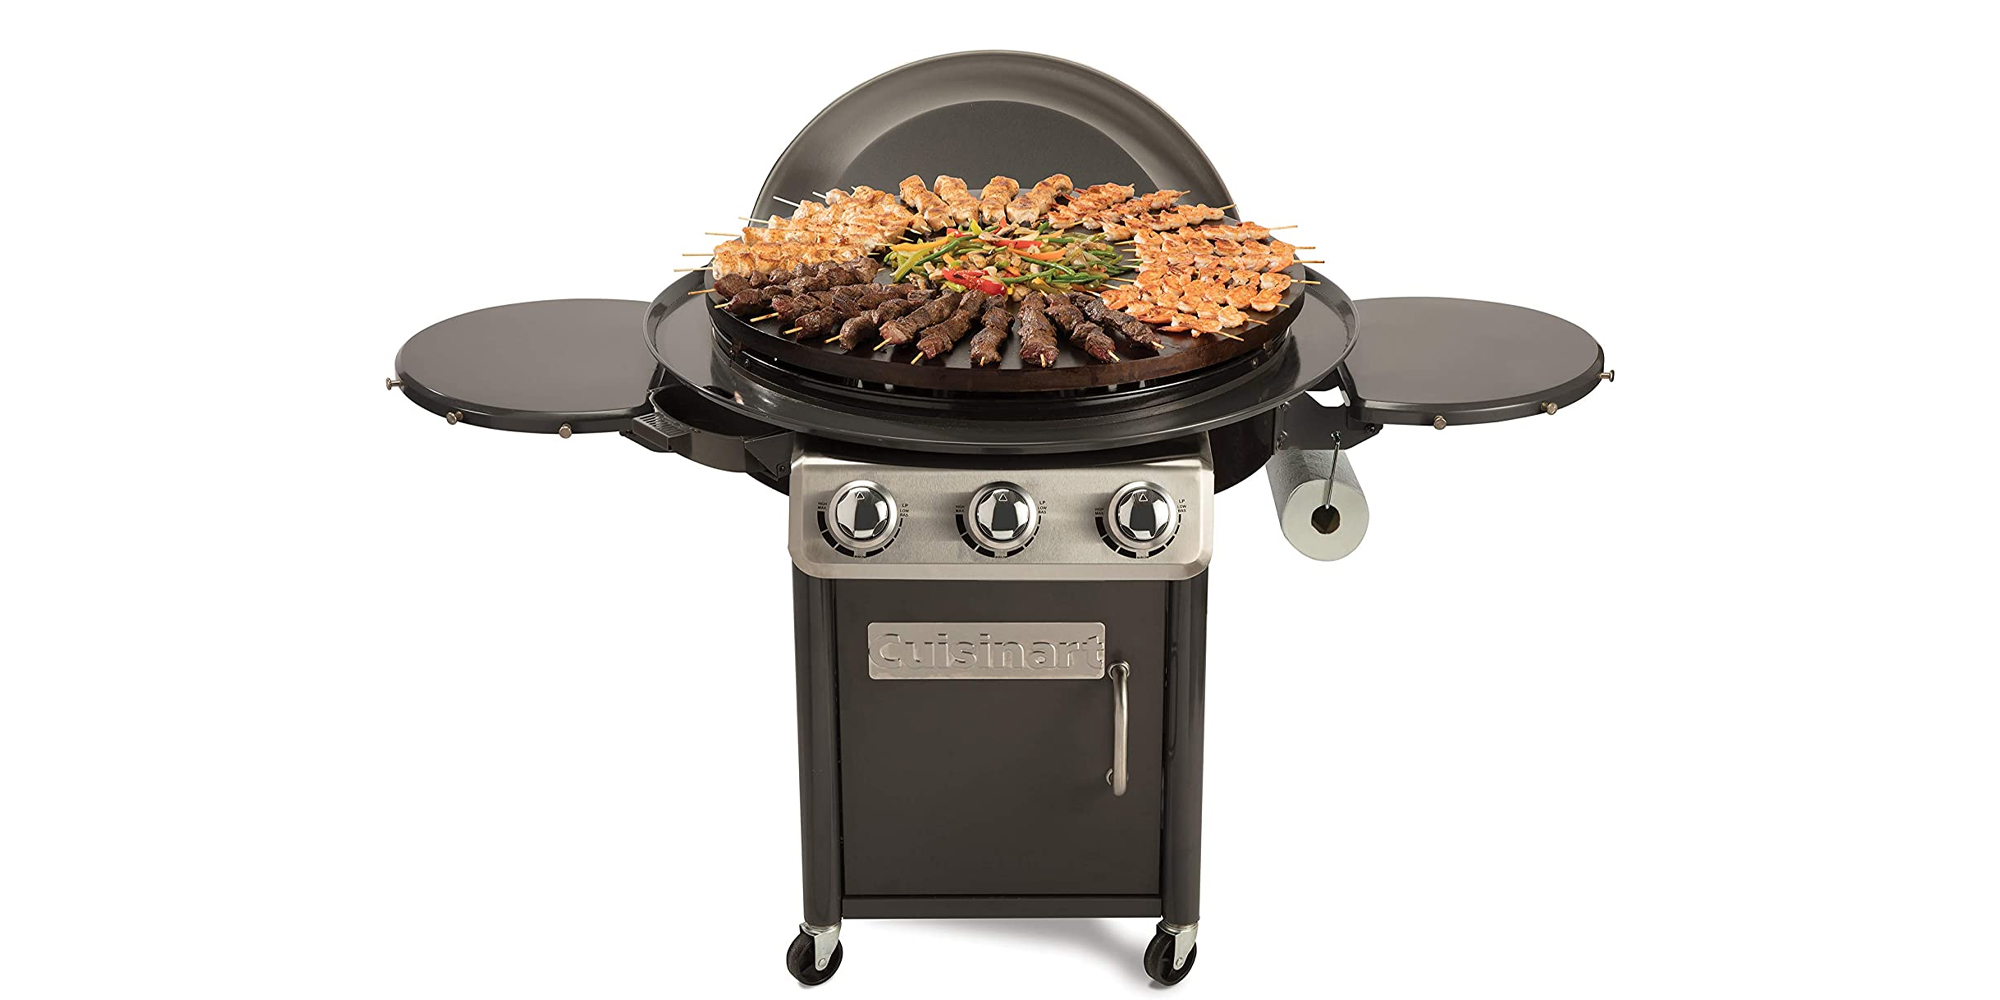 https://9to5toys.com/wp-content/uploads/sites/5/2022/07/Cuisinart-30-inch-round-flat-top-gas-grill.jpg